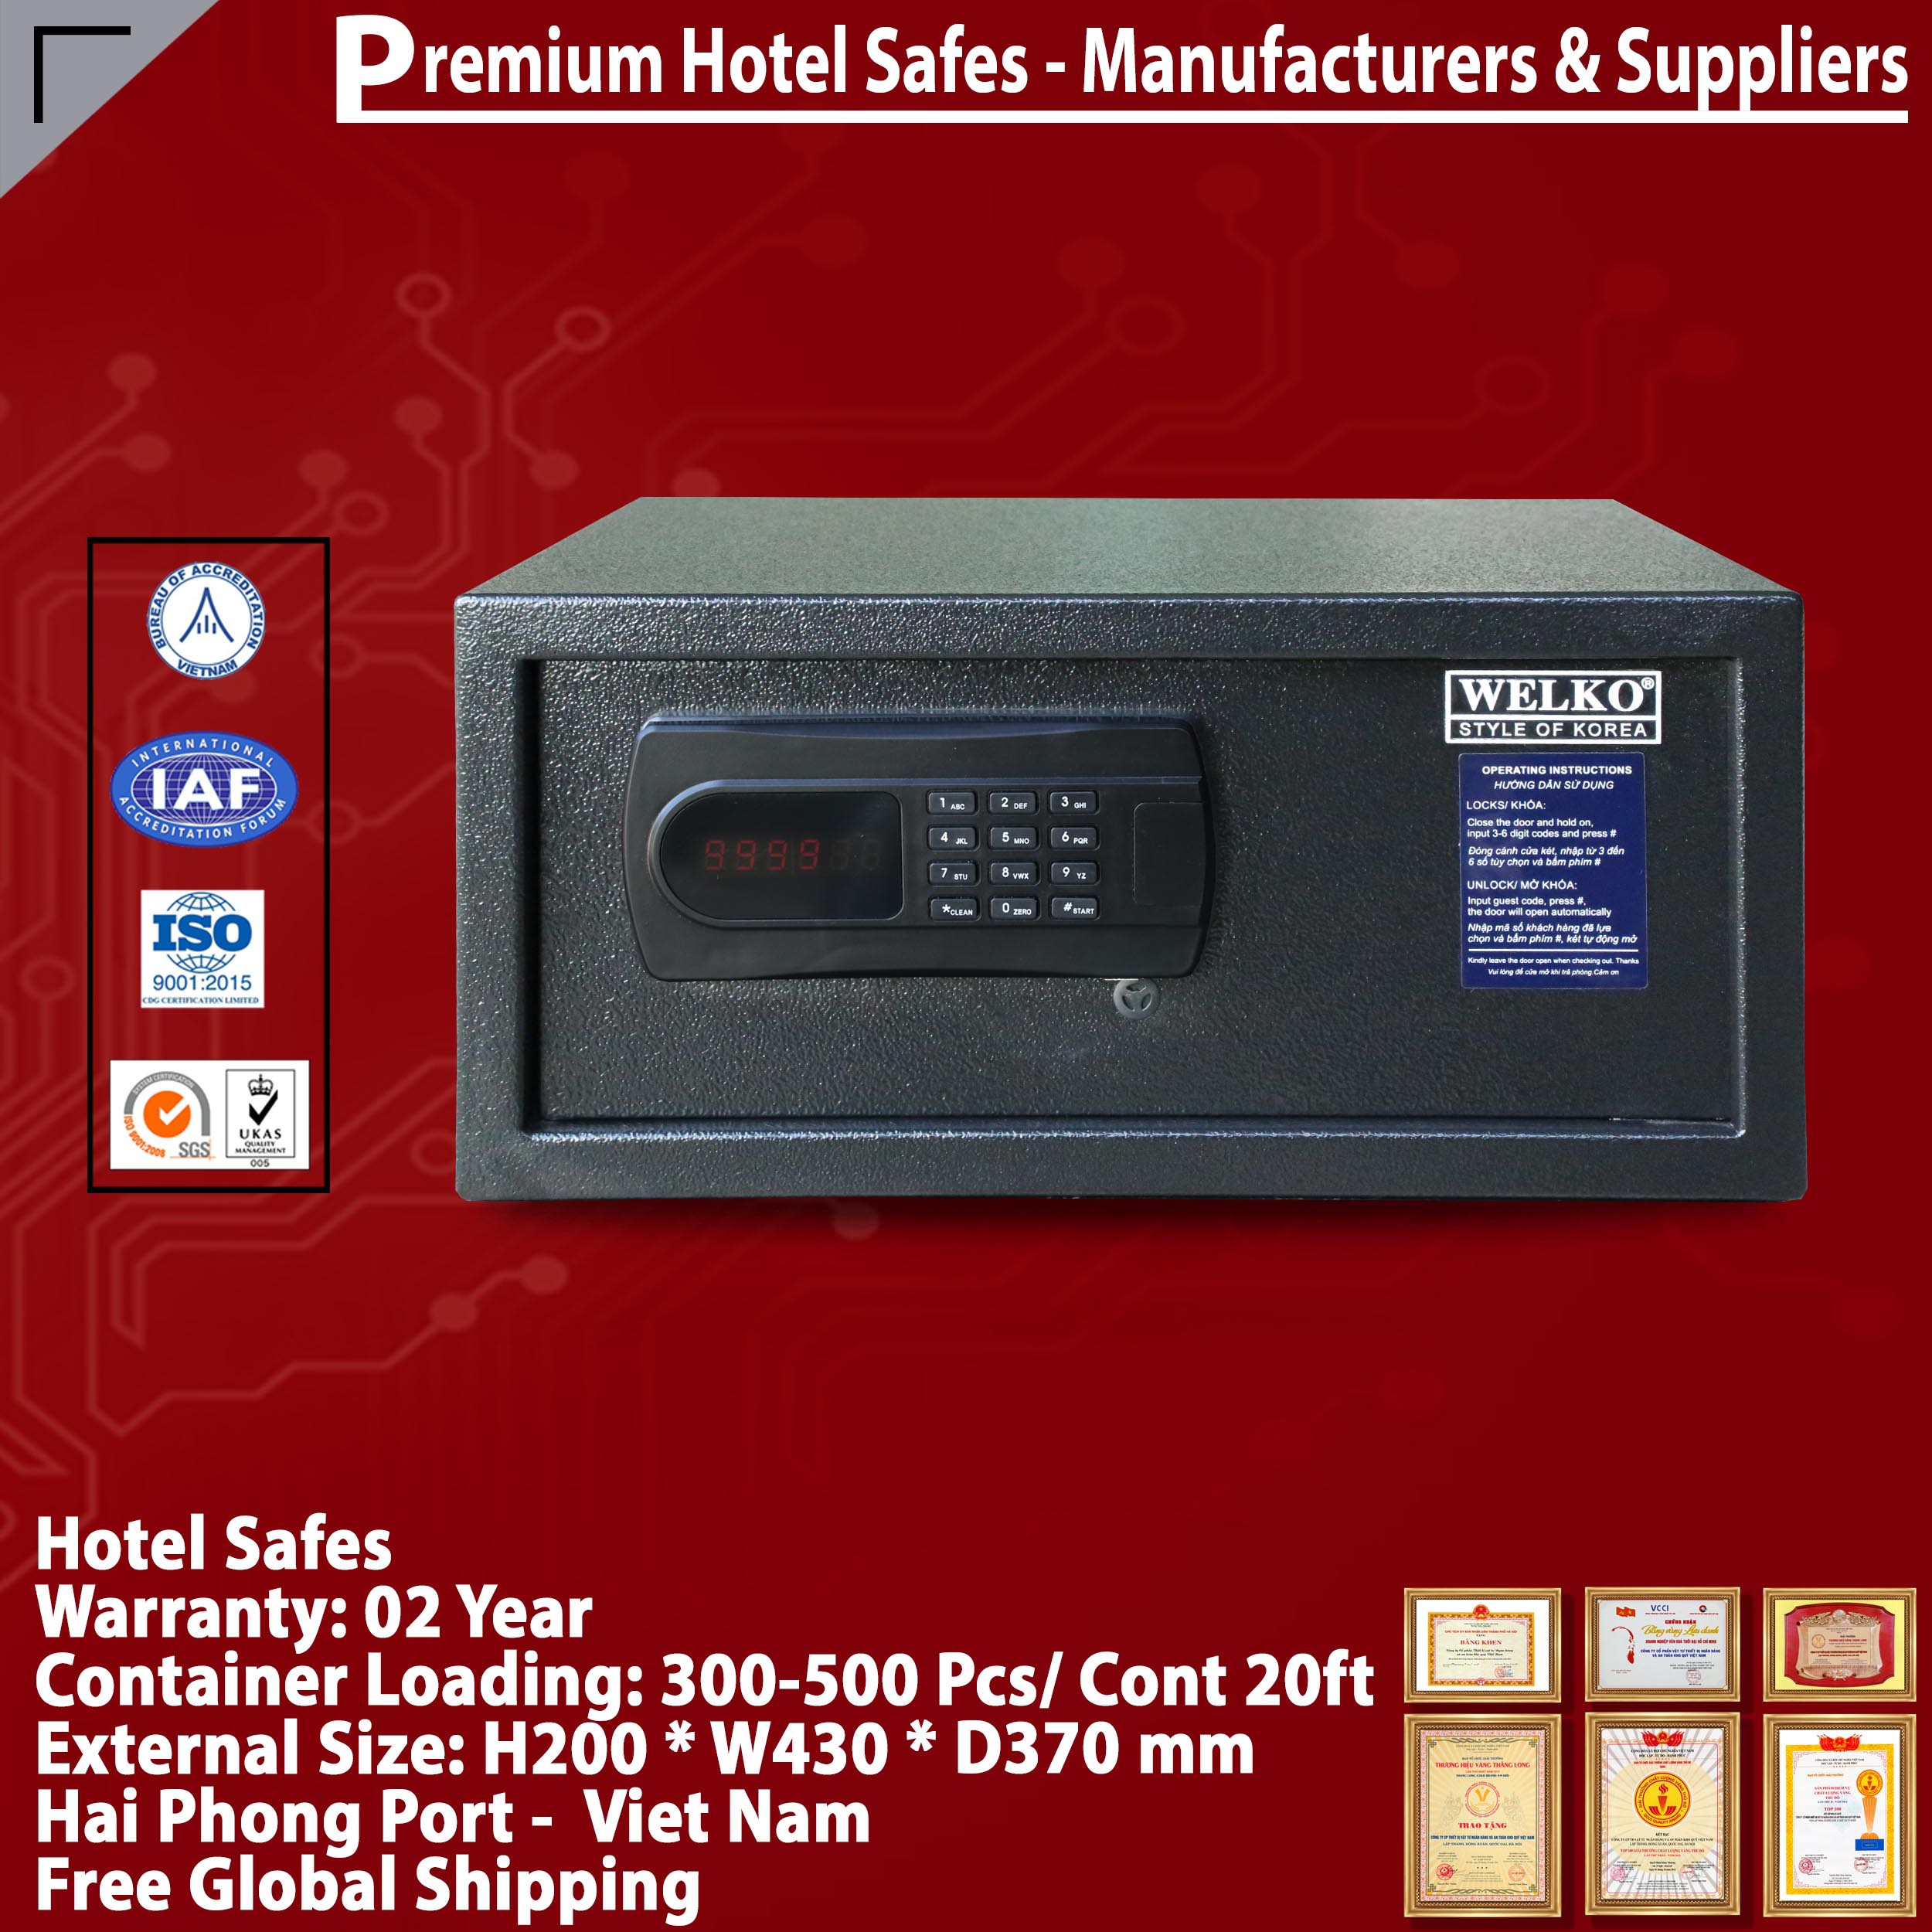 Best Hotel Safe For Home Factory Direct & Fast Shipping‎‎ WELKO